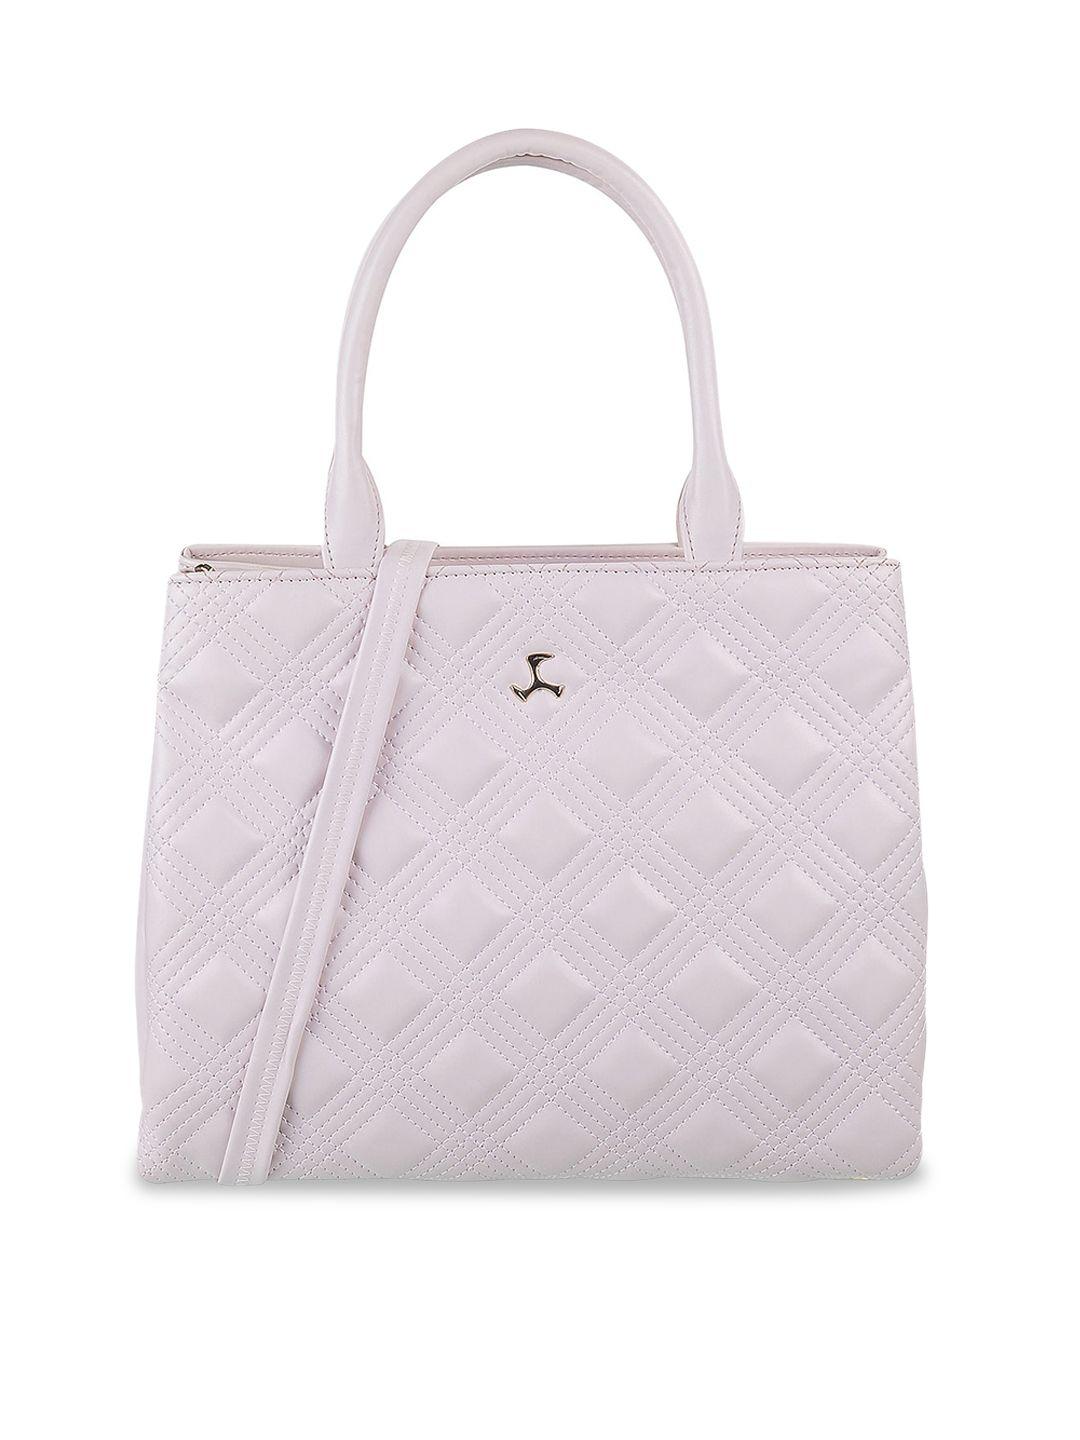 mochi textured structured handheld bag with quilted